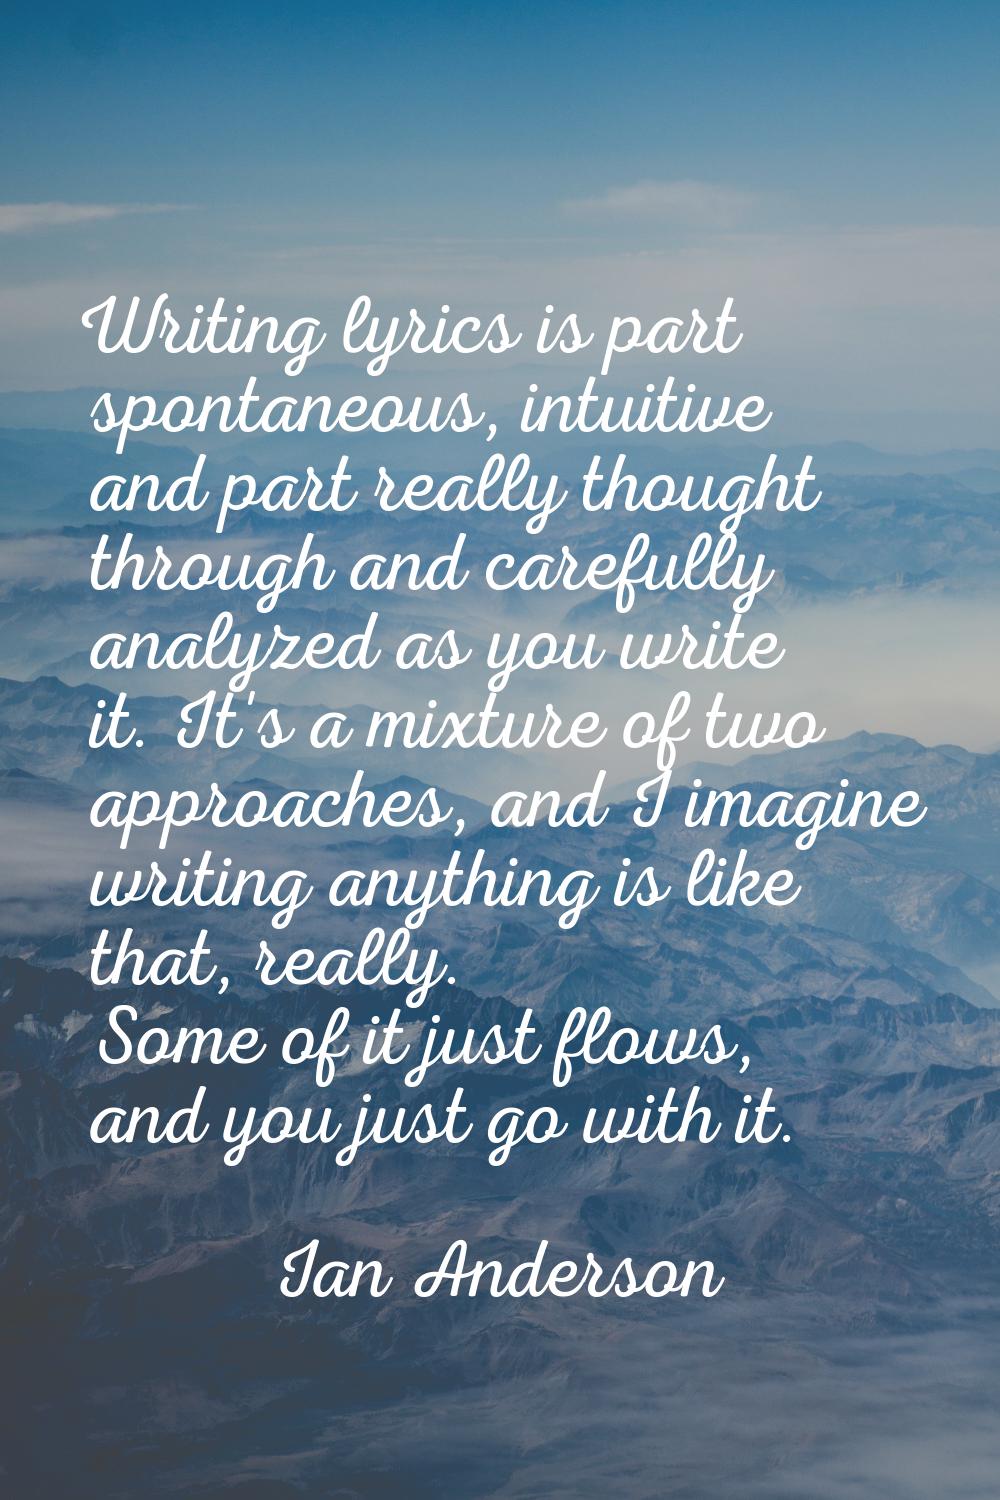 Writing lyrics is part spontaneous, intuitive and part really thought through and carefully analyze